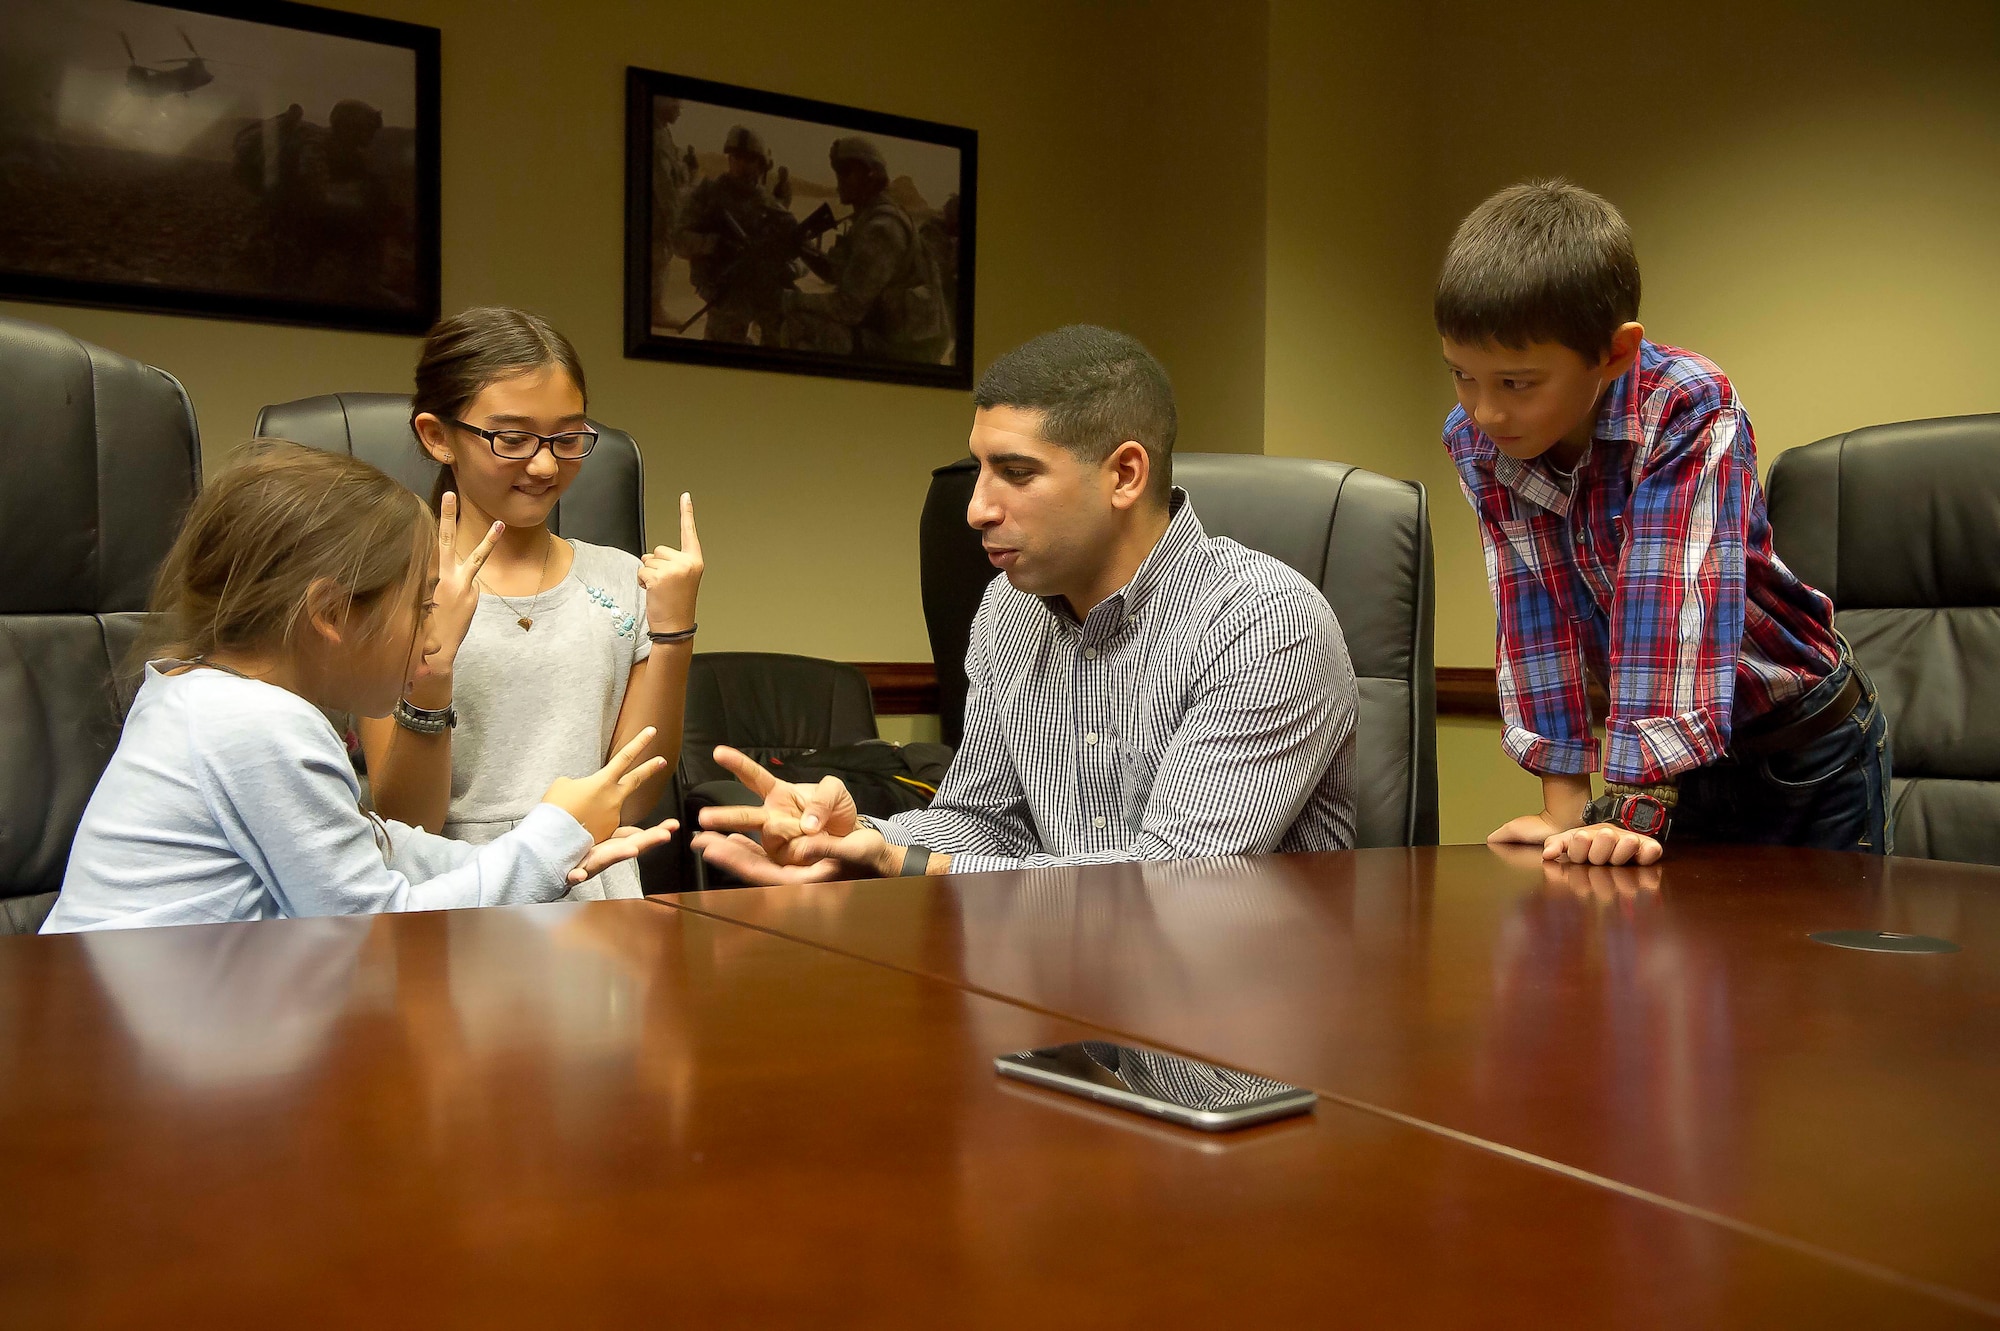 Retired Army Capt. Florent Groberg, a Medal of Honor recipient, plays rock-paper-scissors with Ava Gray, as her sister, Nyah, keeps score and her brother, Garrett, watches inside the Pentagon in Washington, D.C., Nov. 9, 2015. Groberg was with Maj. David Gray, the children’s father, when he was killed in action Aug. 8, 2012, during a deployment to Afghanistan. The family was together at the Pentagon for a Flag for Hope event. (U.S. Air Force photo/Staff Sgt. Christopher Gross)